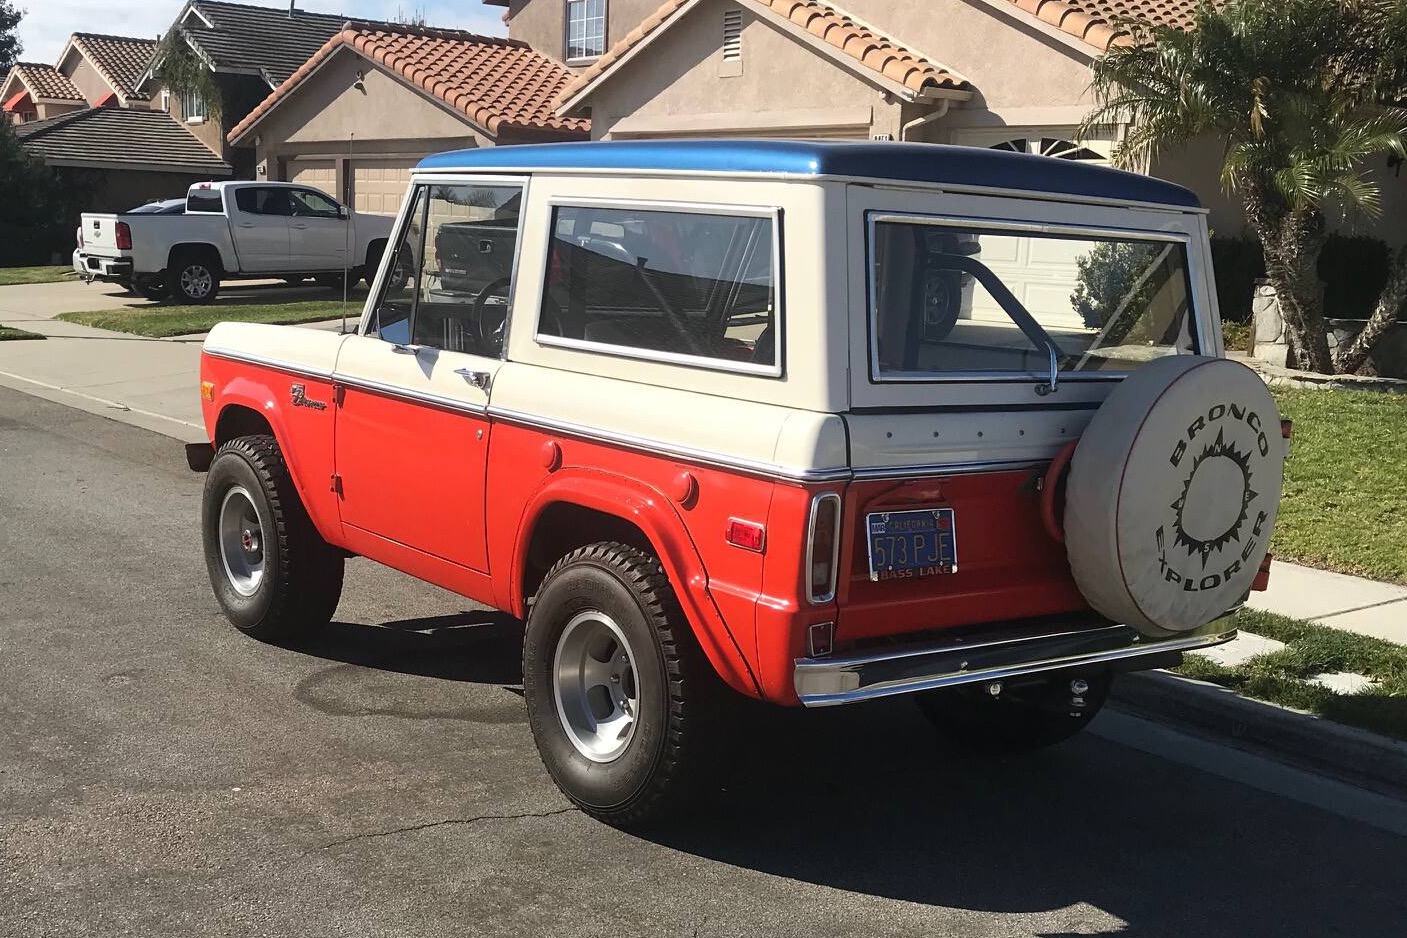 the-collectible-suv-79k-mile-1975-ford-bronco-stroppe-baja-edition77149615-770-0@2X